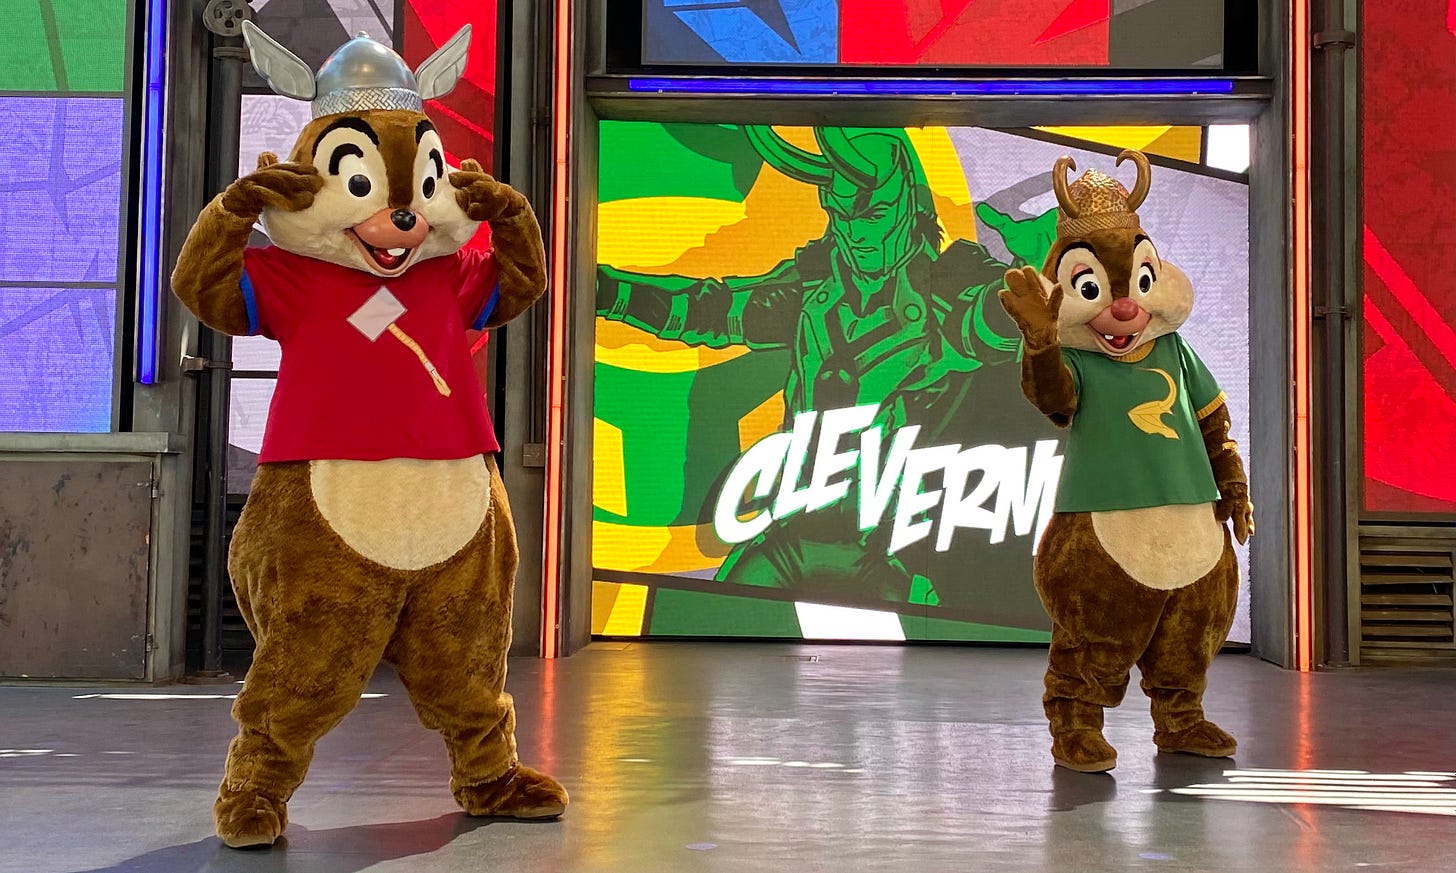 Chip & Dale in their Thor and Loki costumes